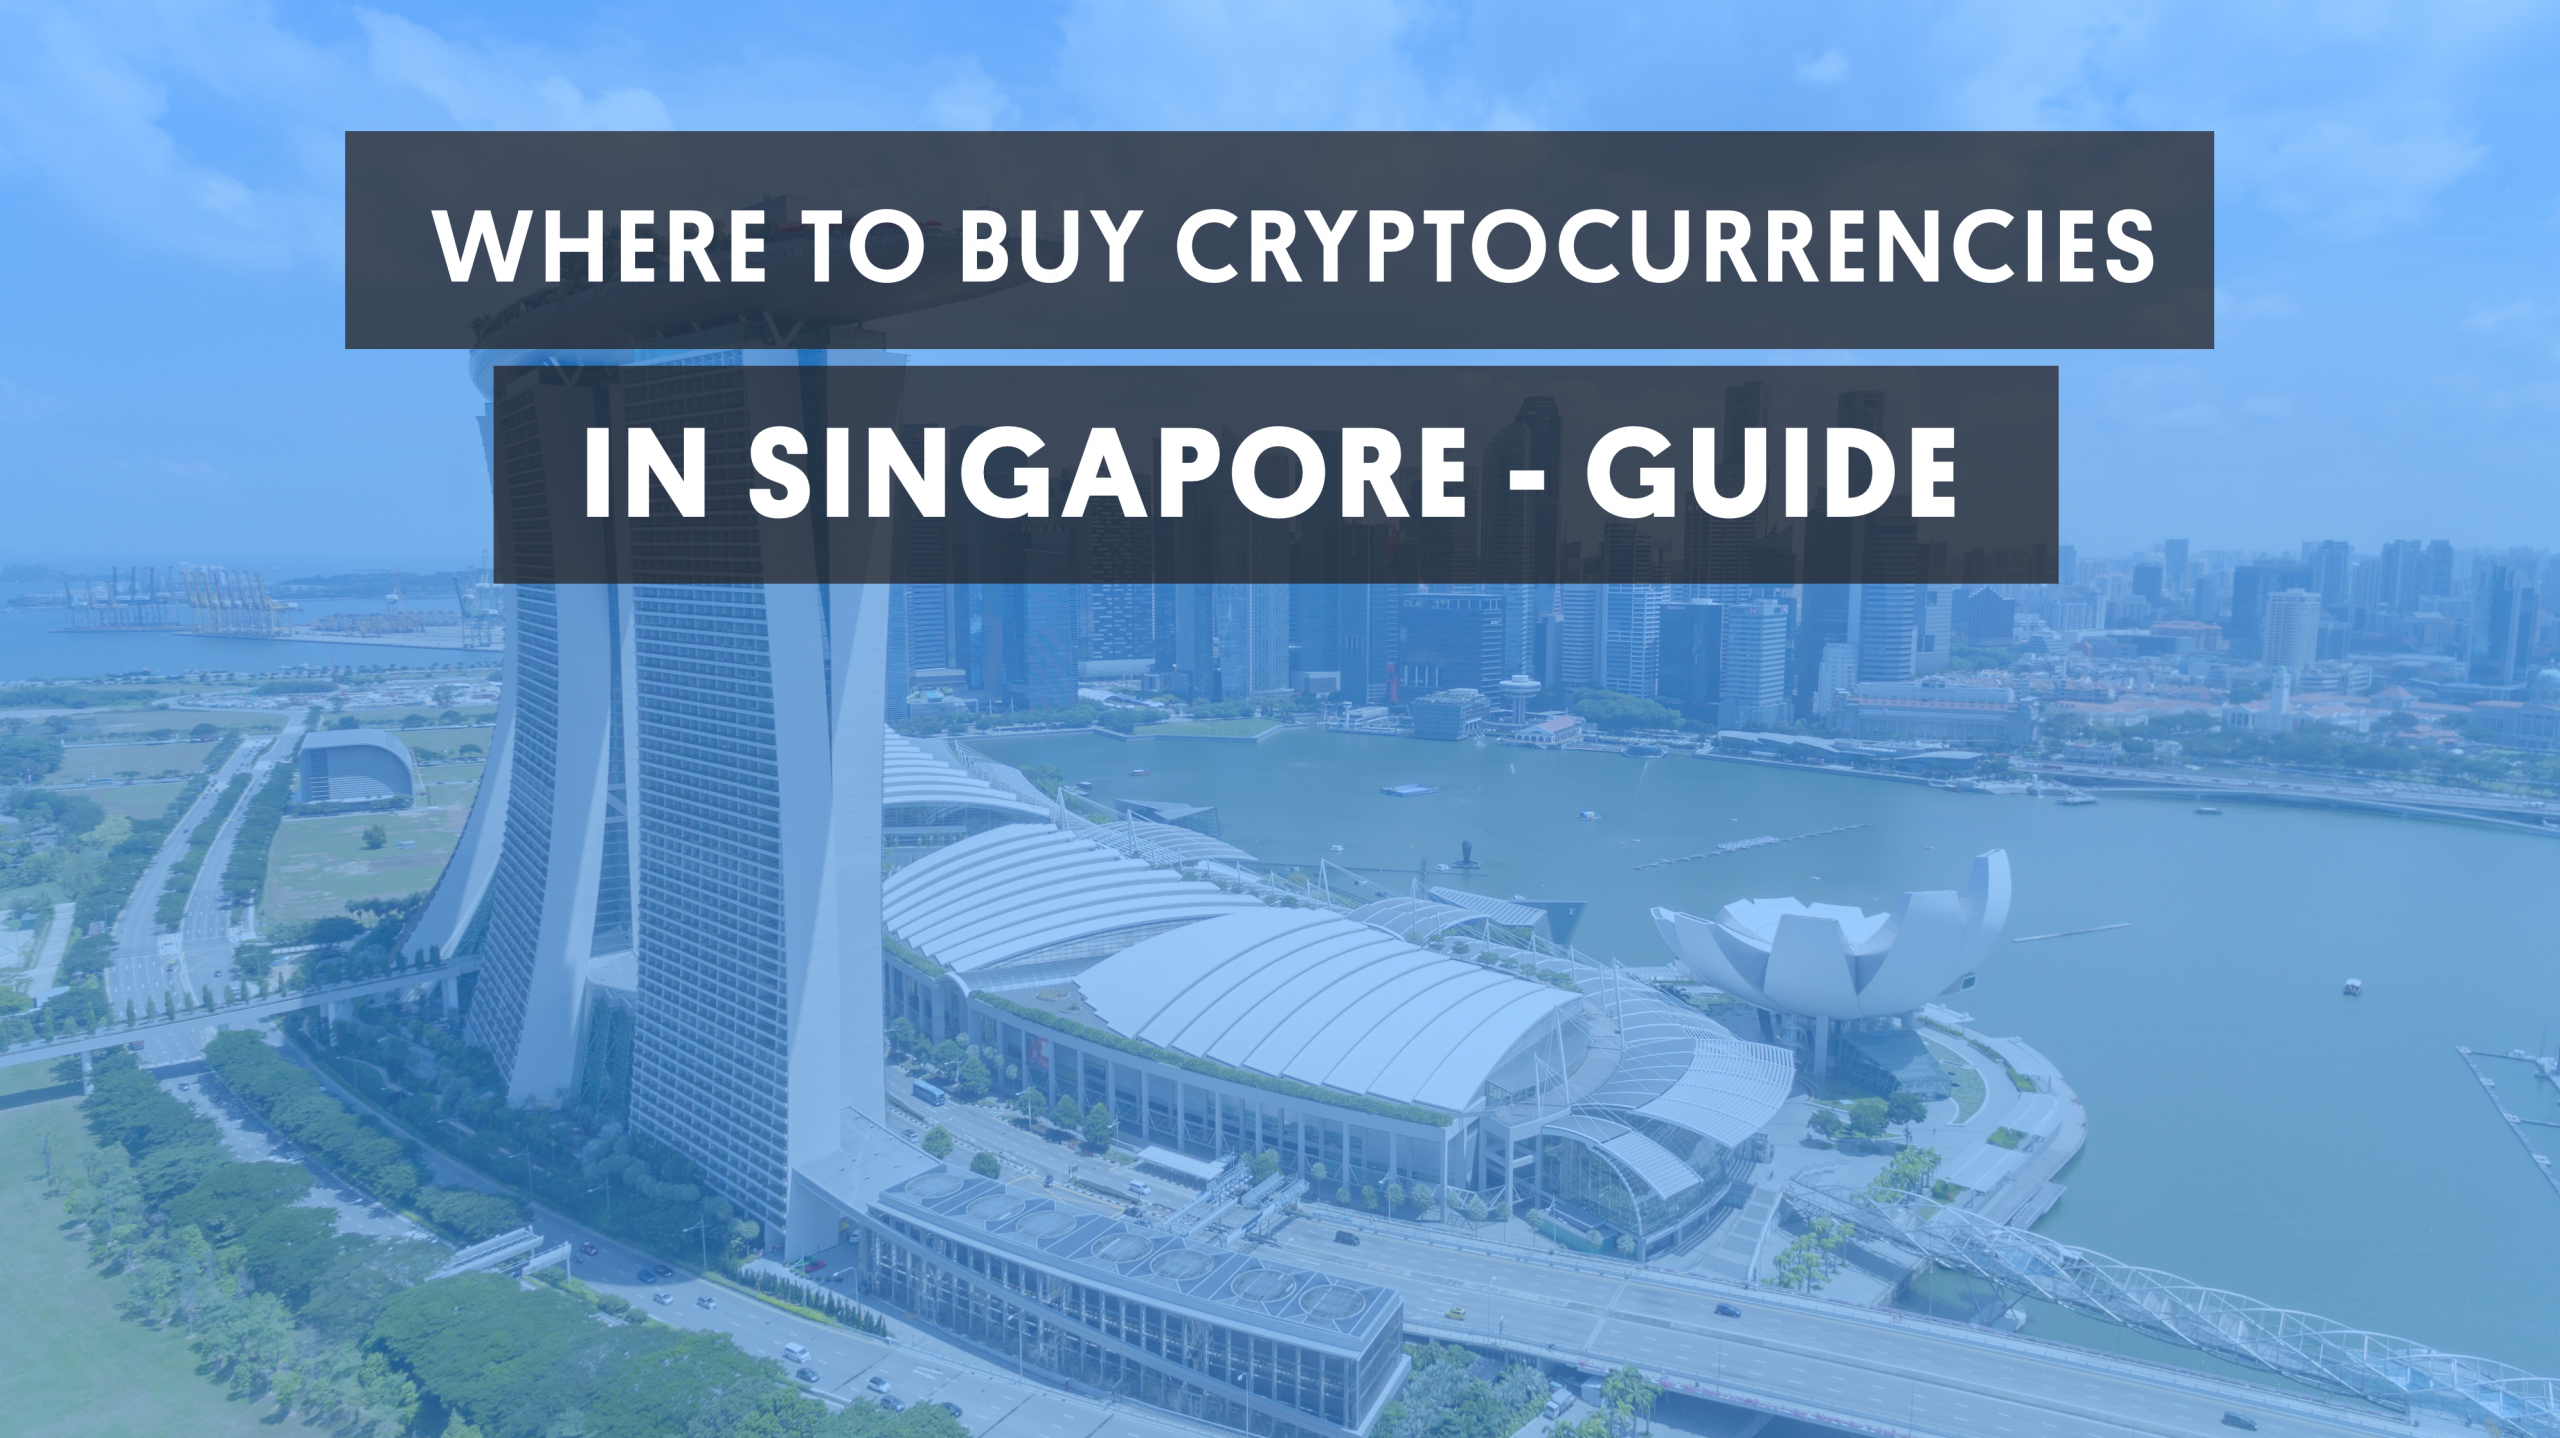 Where to buy cryptocurrencies in Singapore guide